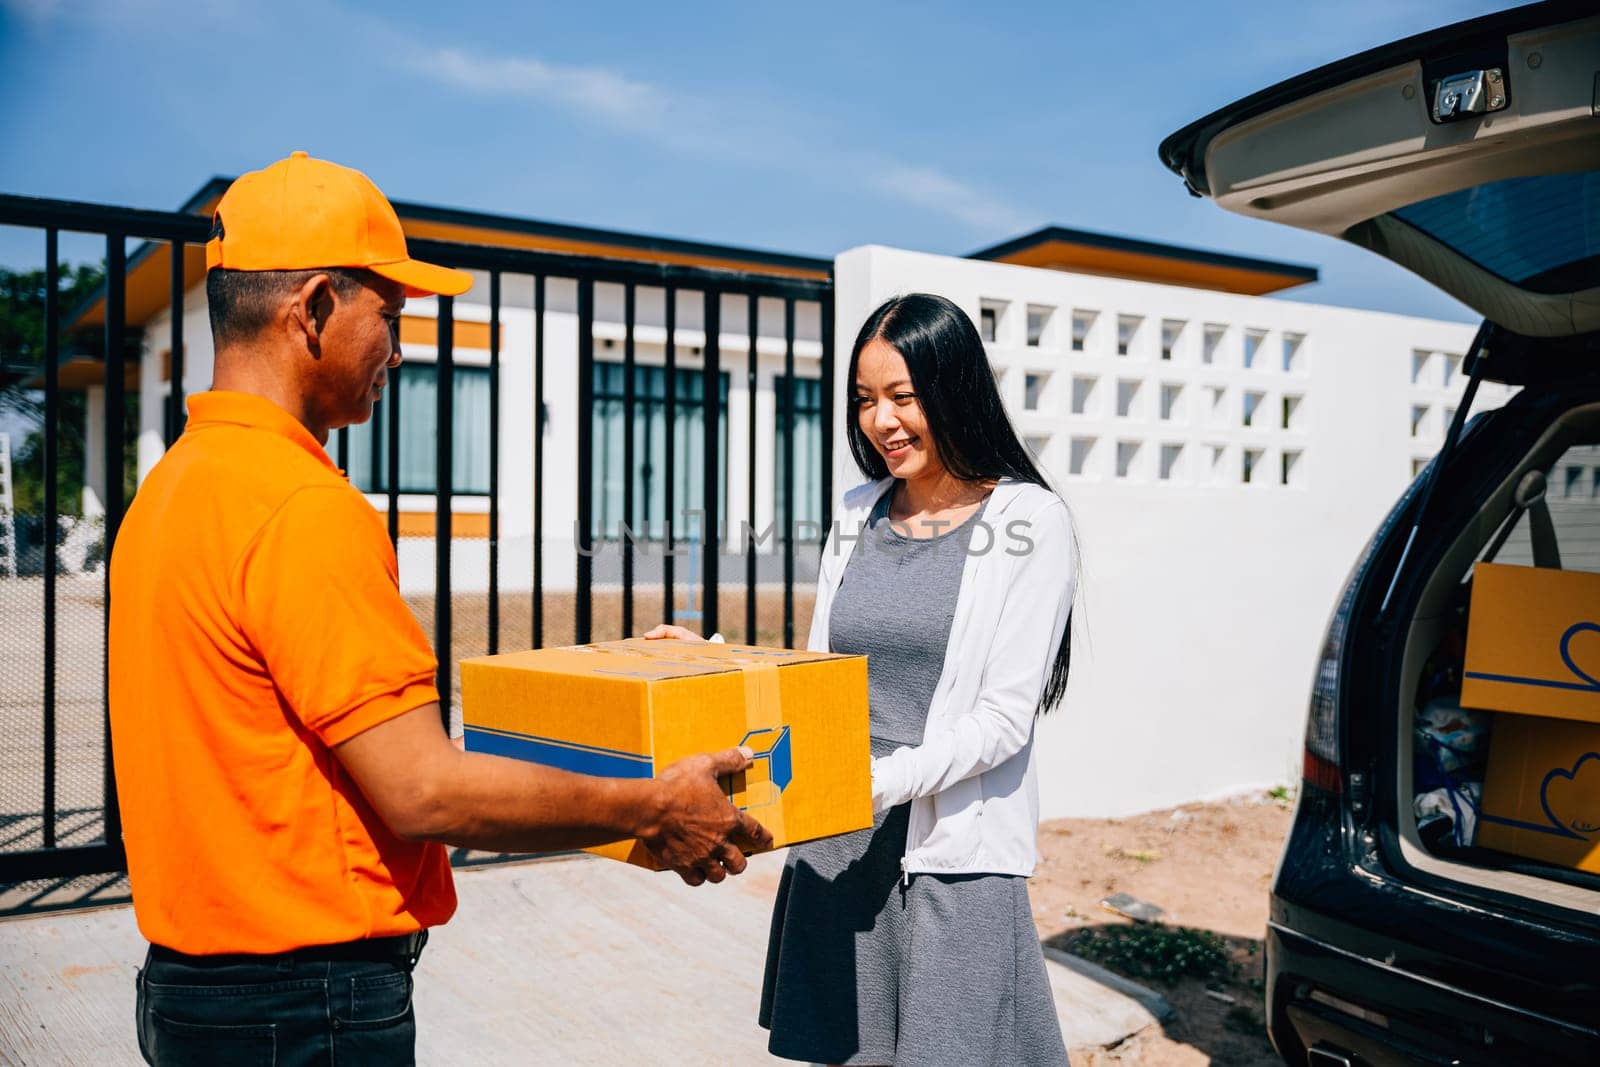 Delivery service concept illustrated as a courier man in uniform hands a cardboard parcel to a smiling woman customer at her home door. Emphasizing modern efficient home delivery service.